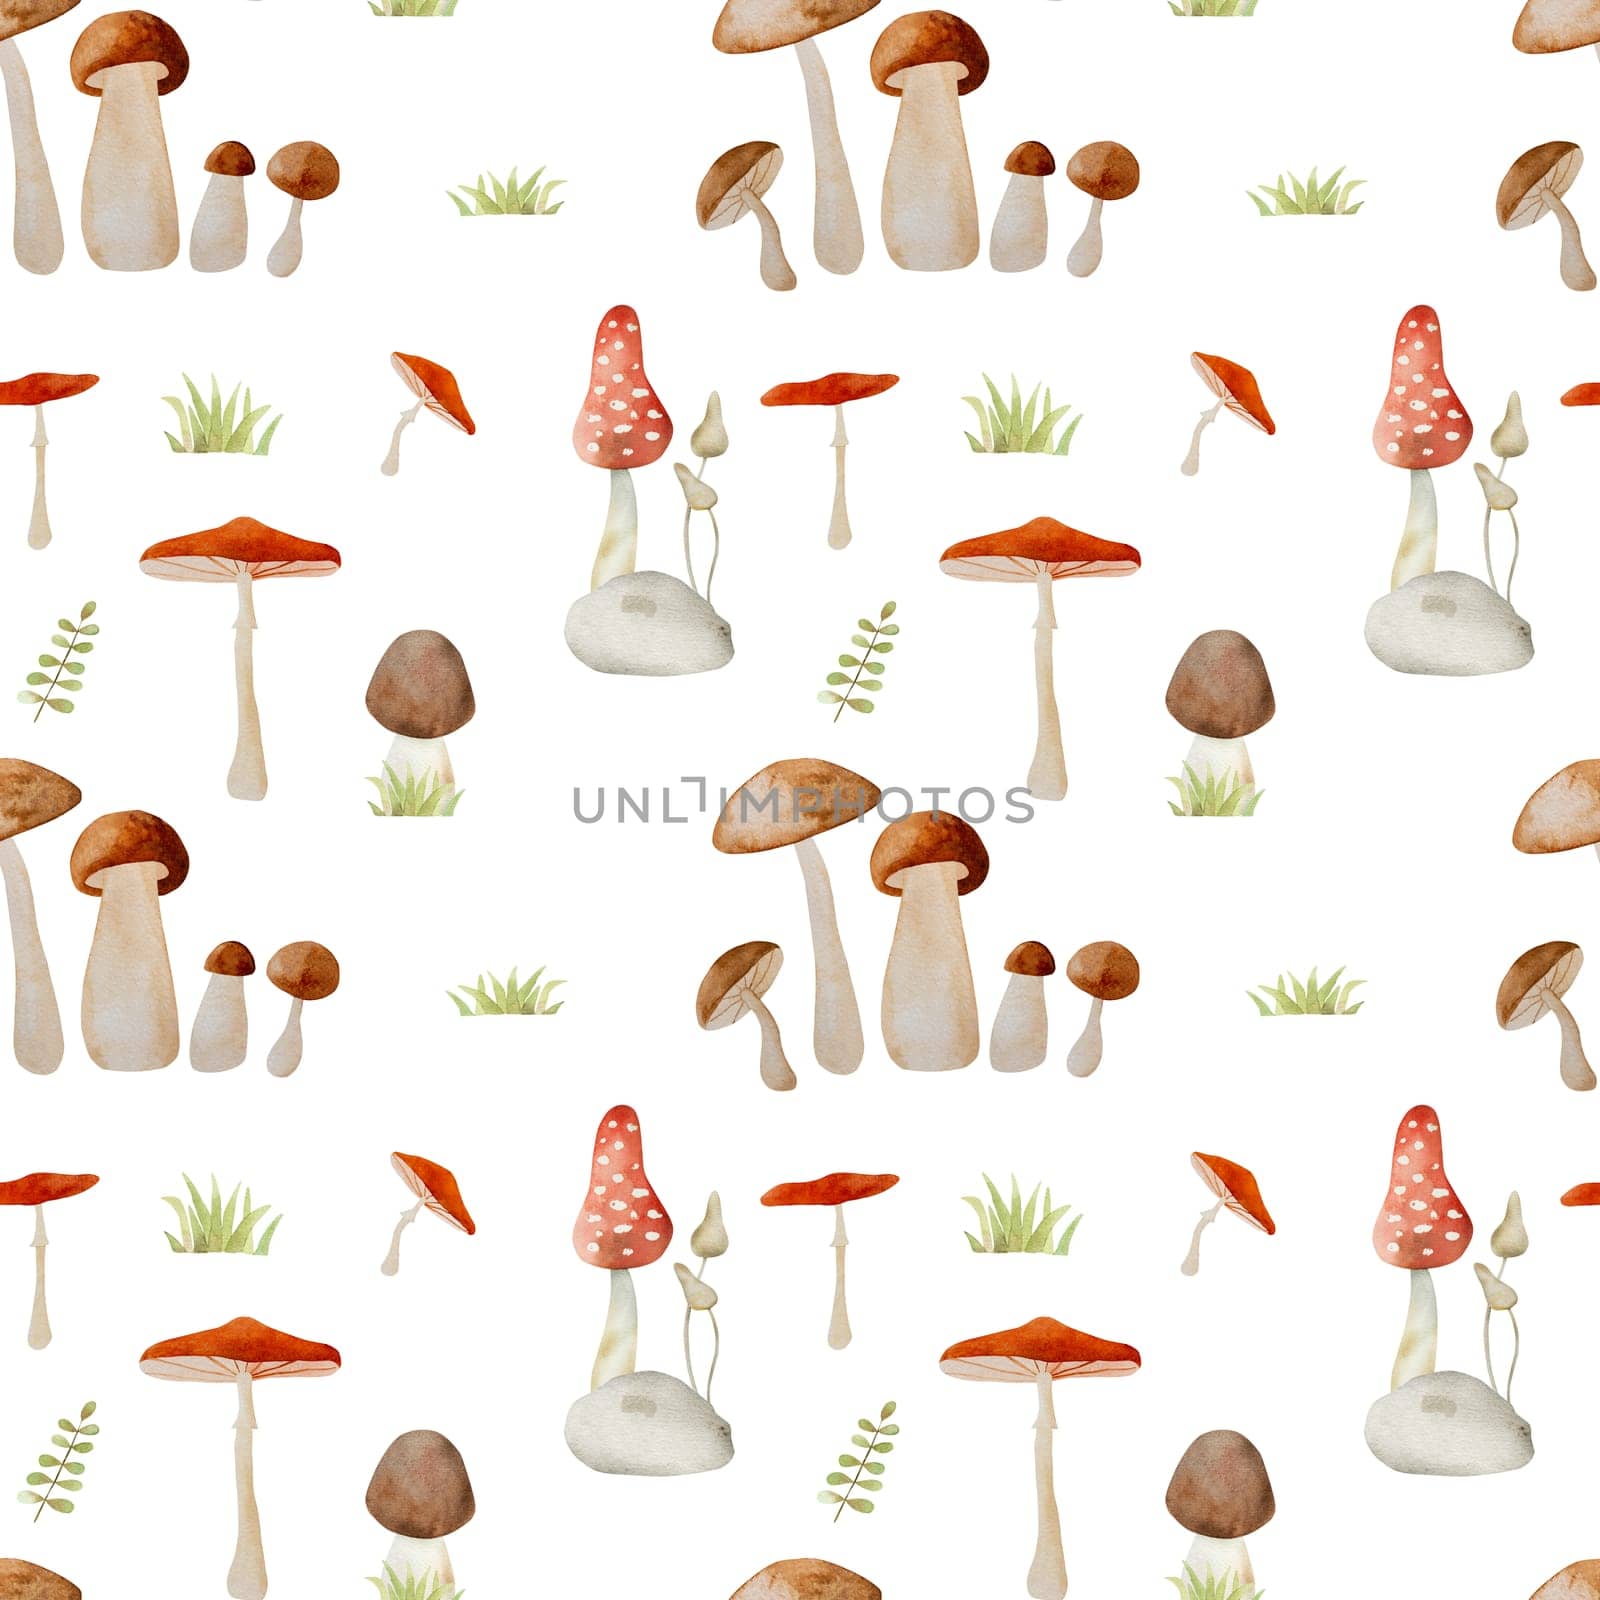 Forest mushrooms watercolor painting seamless pattern. Wood fungal vegetables fly agaric amarita and chanterelle aquarelle drawing